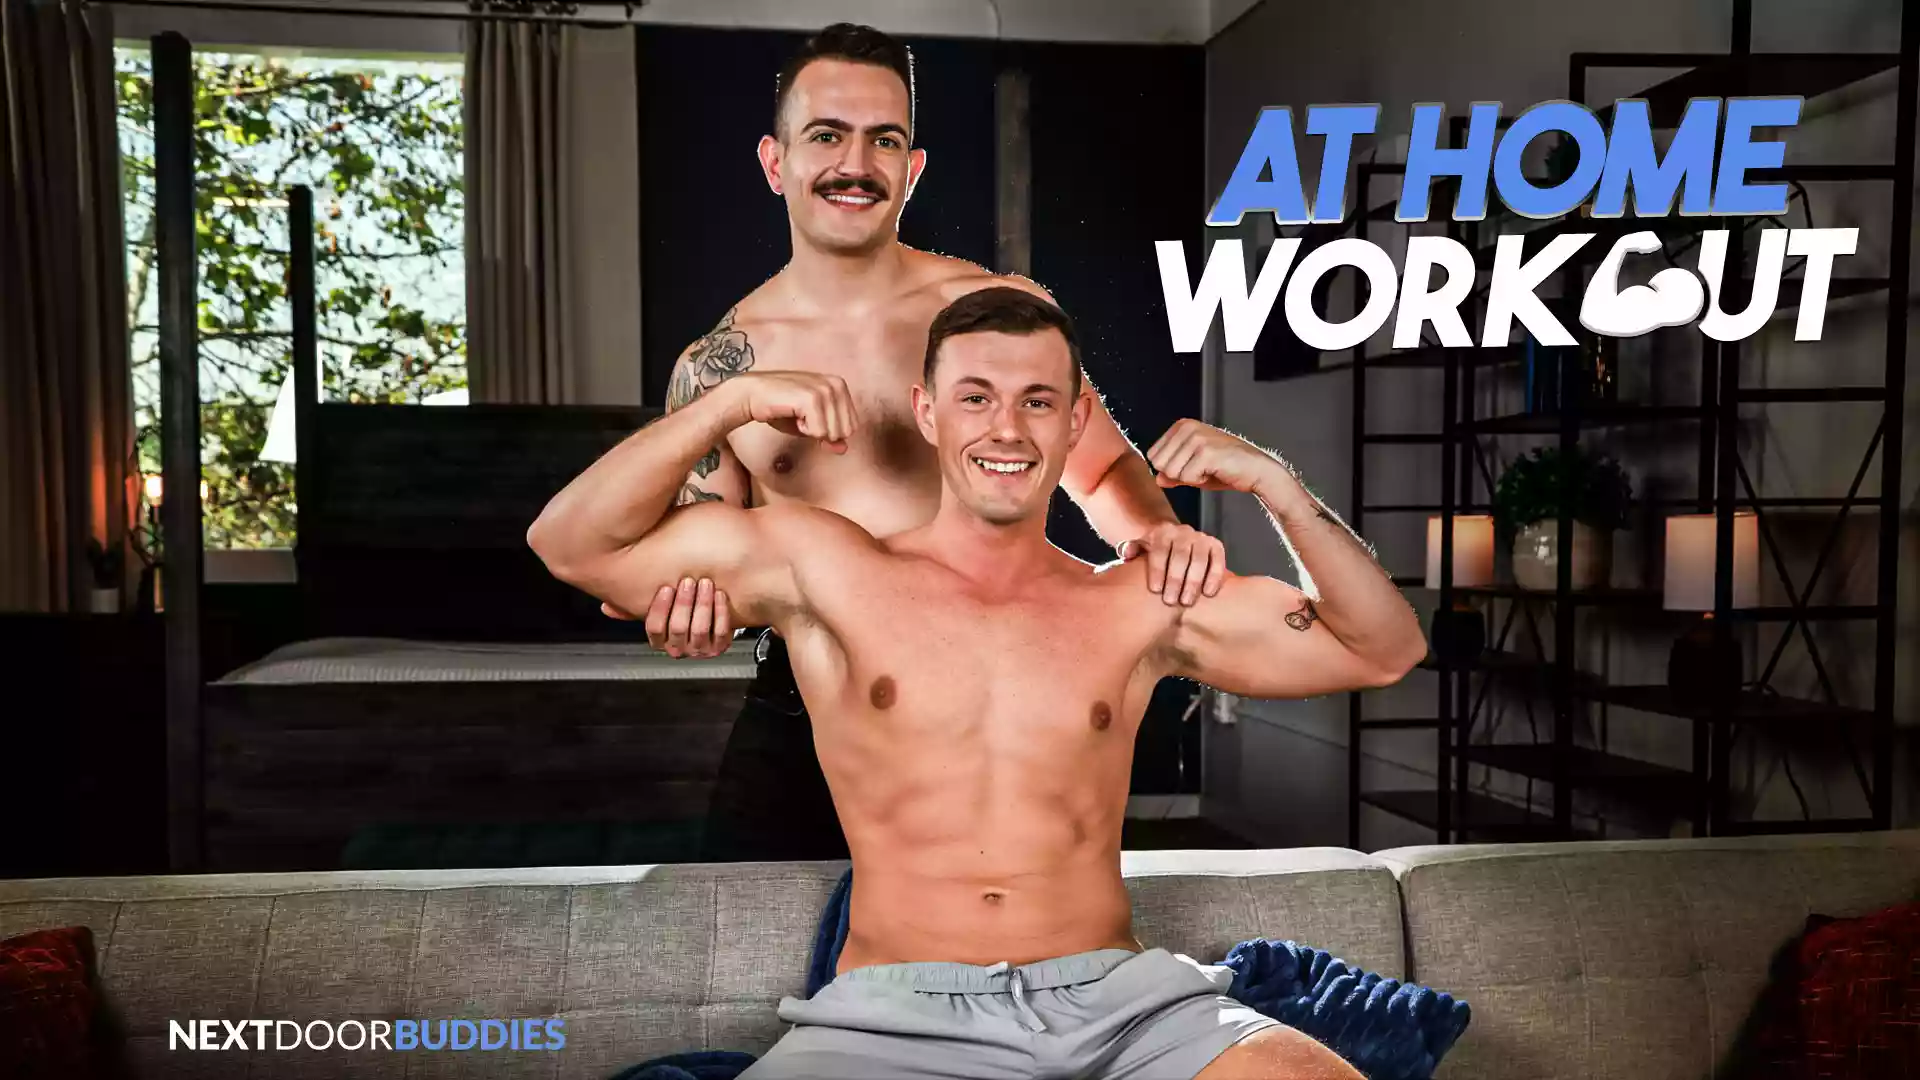 At Home Workout – Ryder Owens and Guido